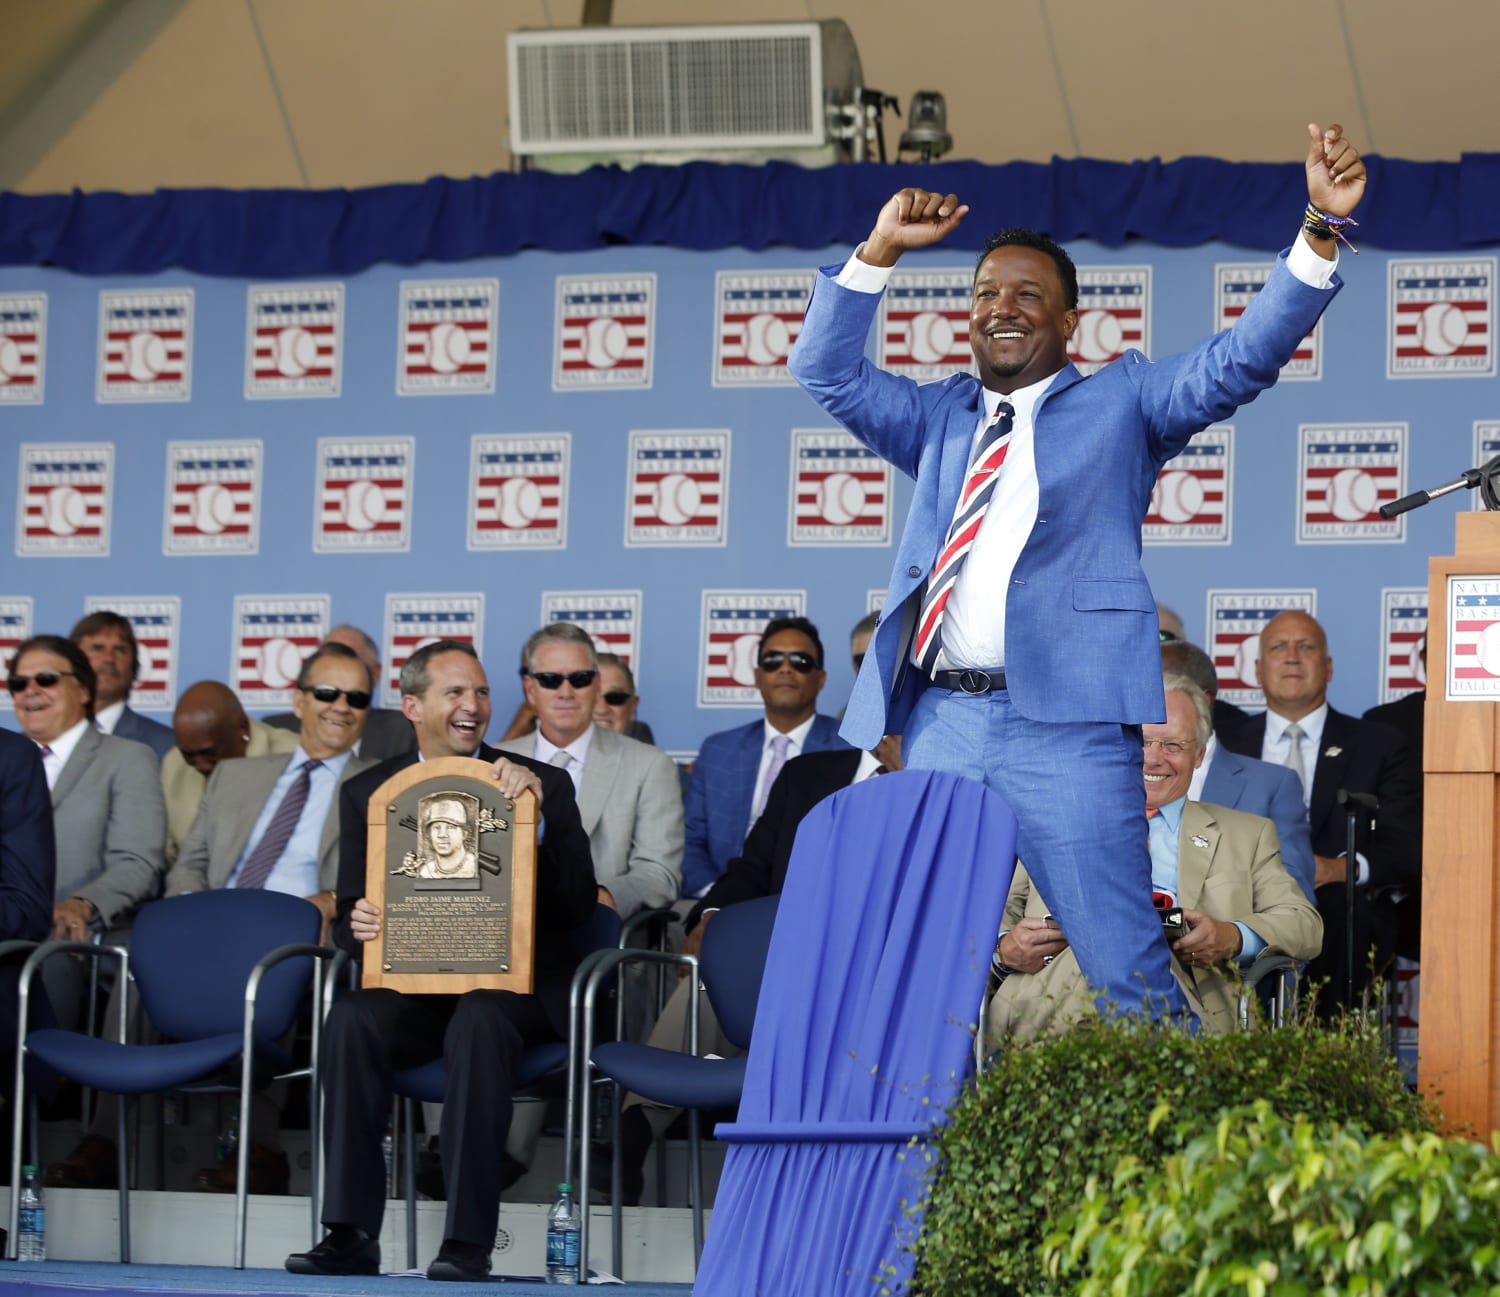 Pedro Martinez - Canadian Baseball Hall of Fame and Museum